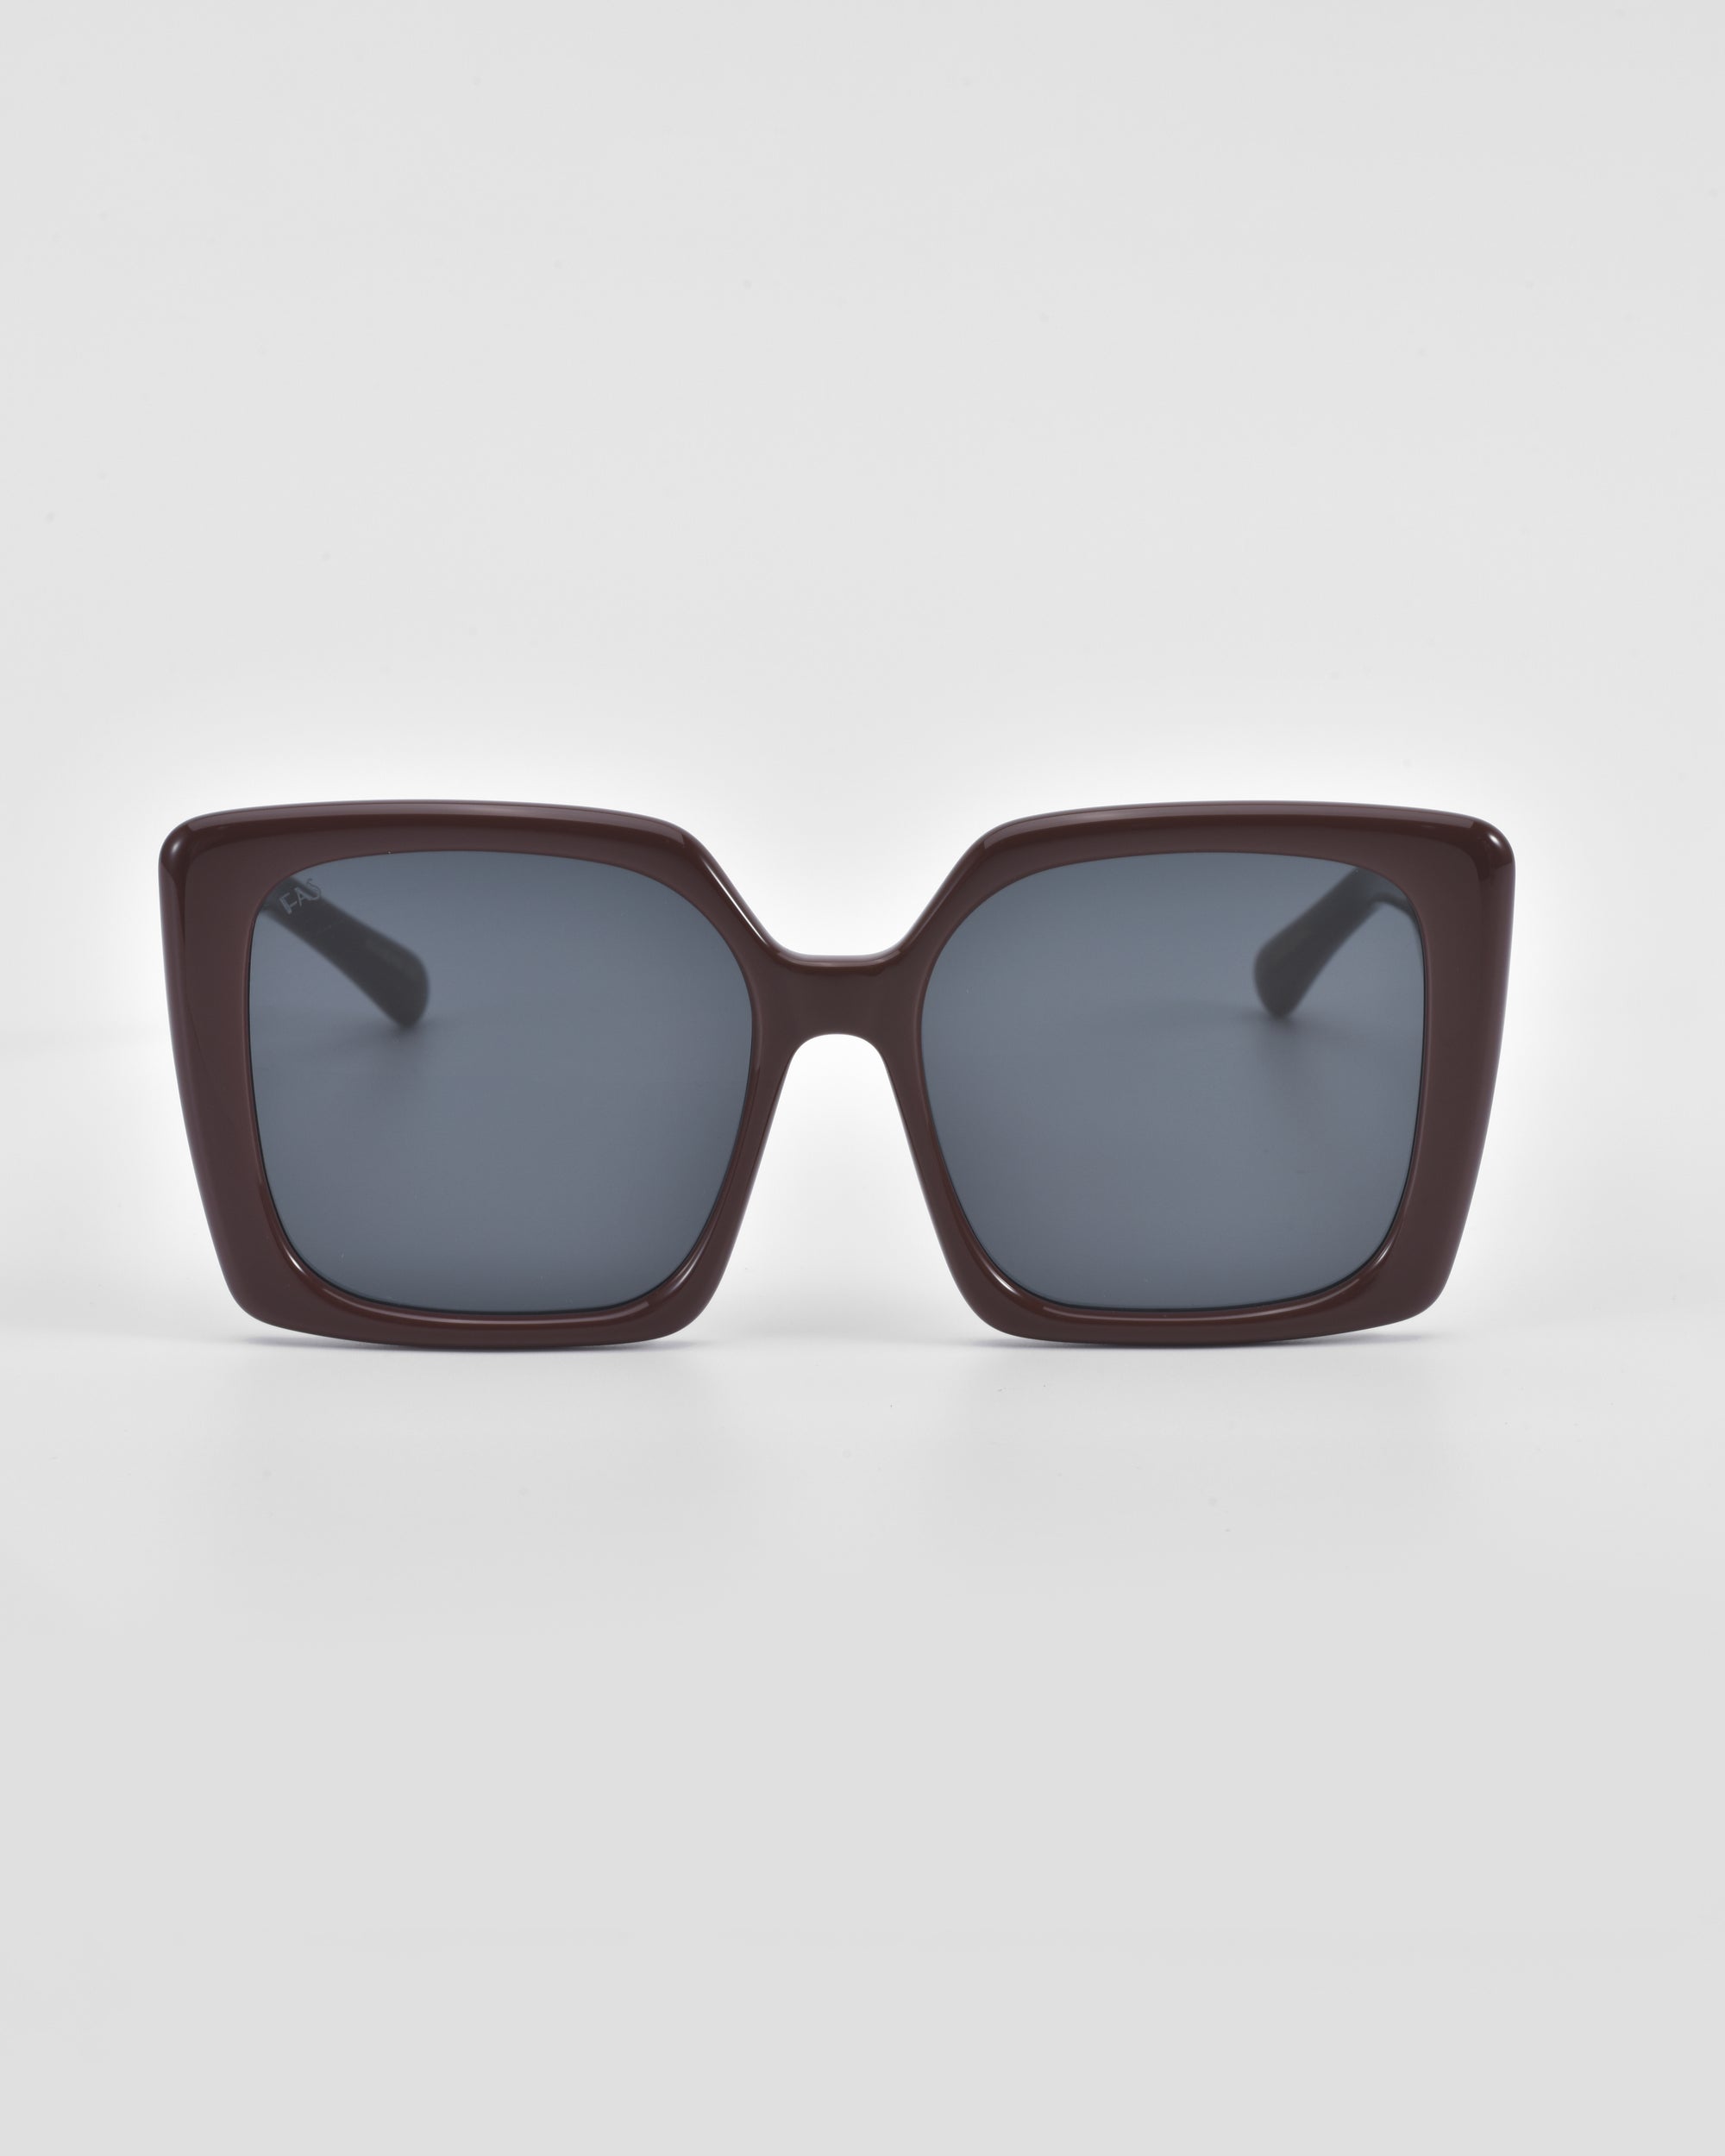 A pair of oversized soft-square For Art&#39;s Sake® Eos sunglasses with dark frames, viewed from the front against a plain white background. The lenses are tinted dark, providing a chic and fashionable appearance. Classic temple round details elevate the timeless charm, making these shades a stylish staple.